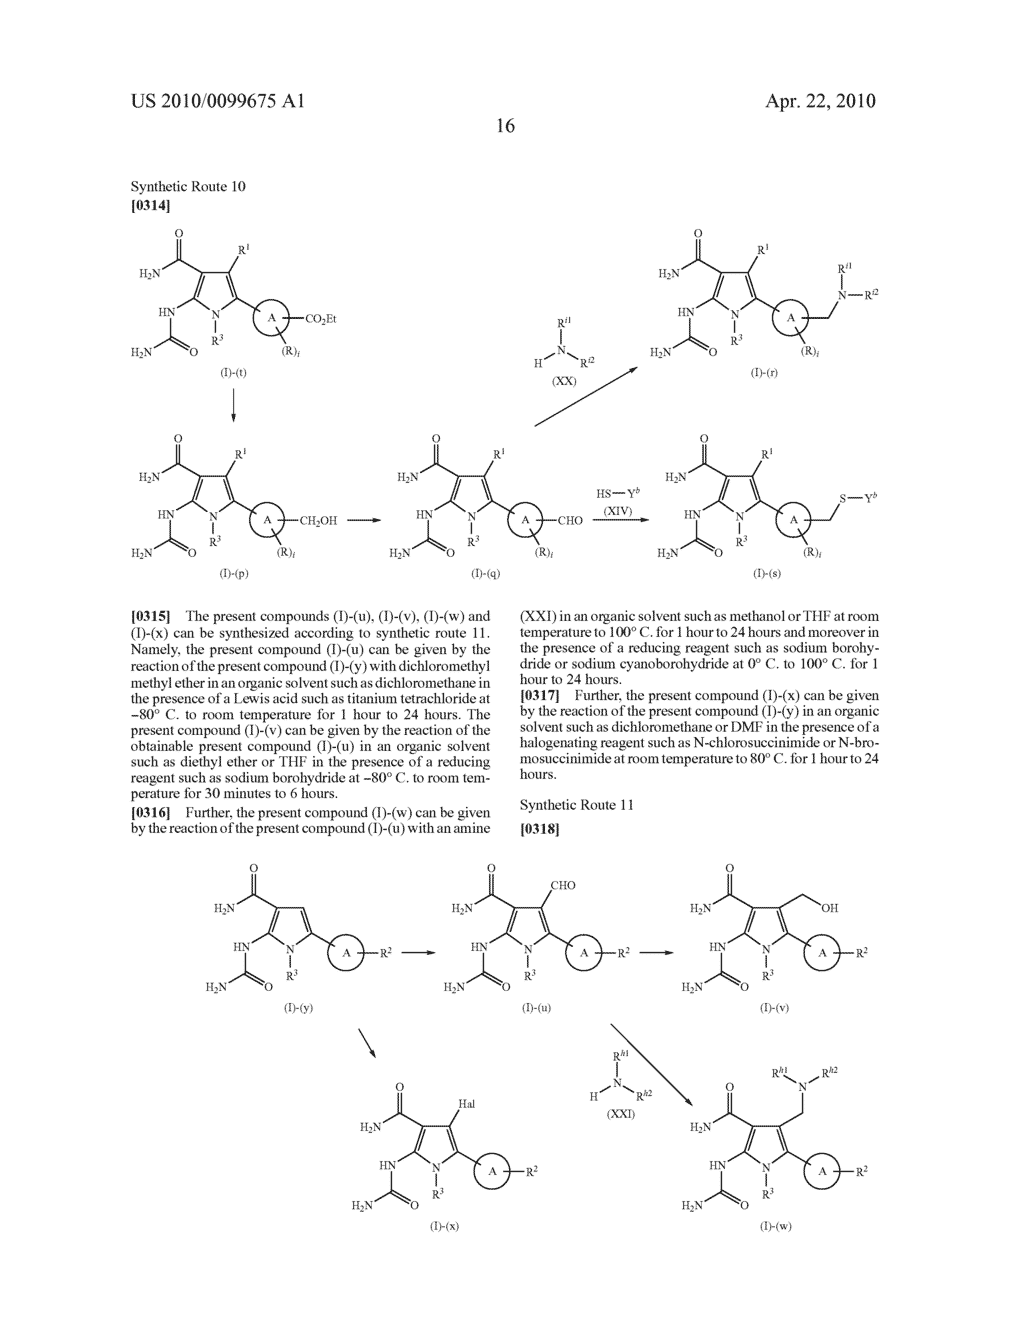 NOVEL PYRROLE DERIVATIVE HAVING UREIDO GROUP AND AMINOCARBONYL GROUP AS SUBSTITUENTS - diagram, schematic, and image 17